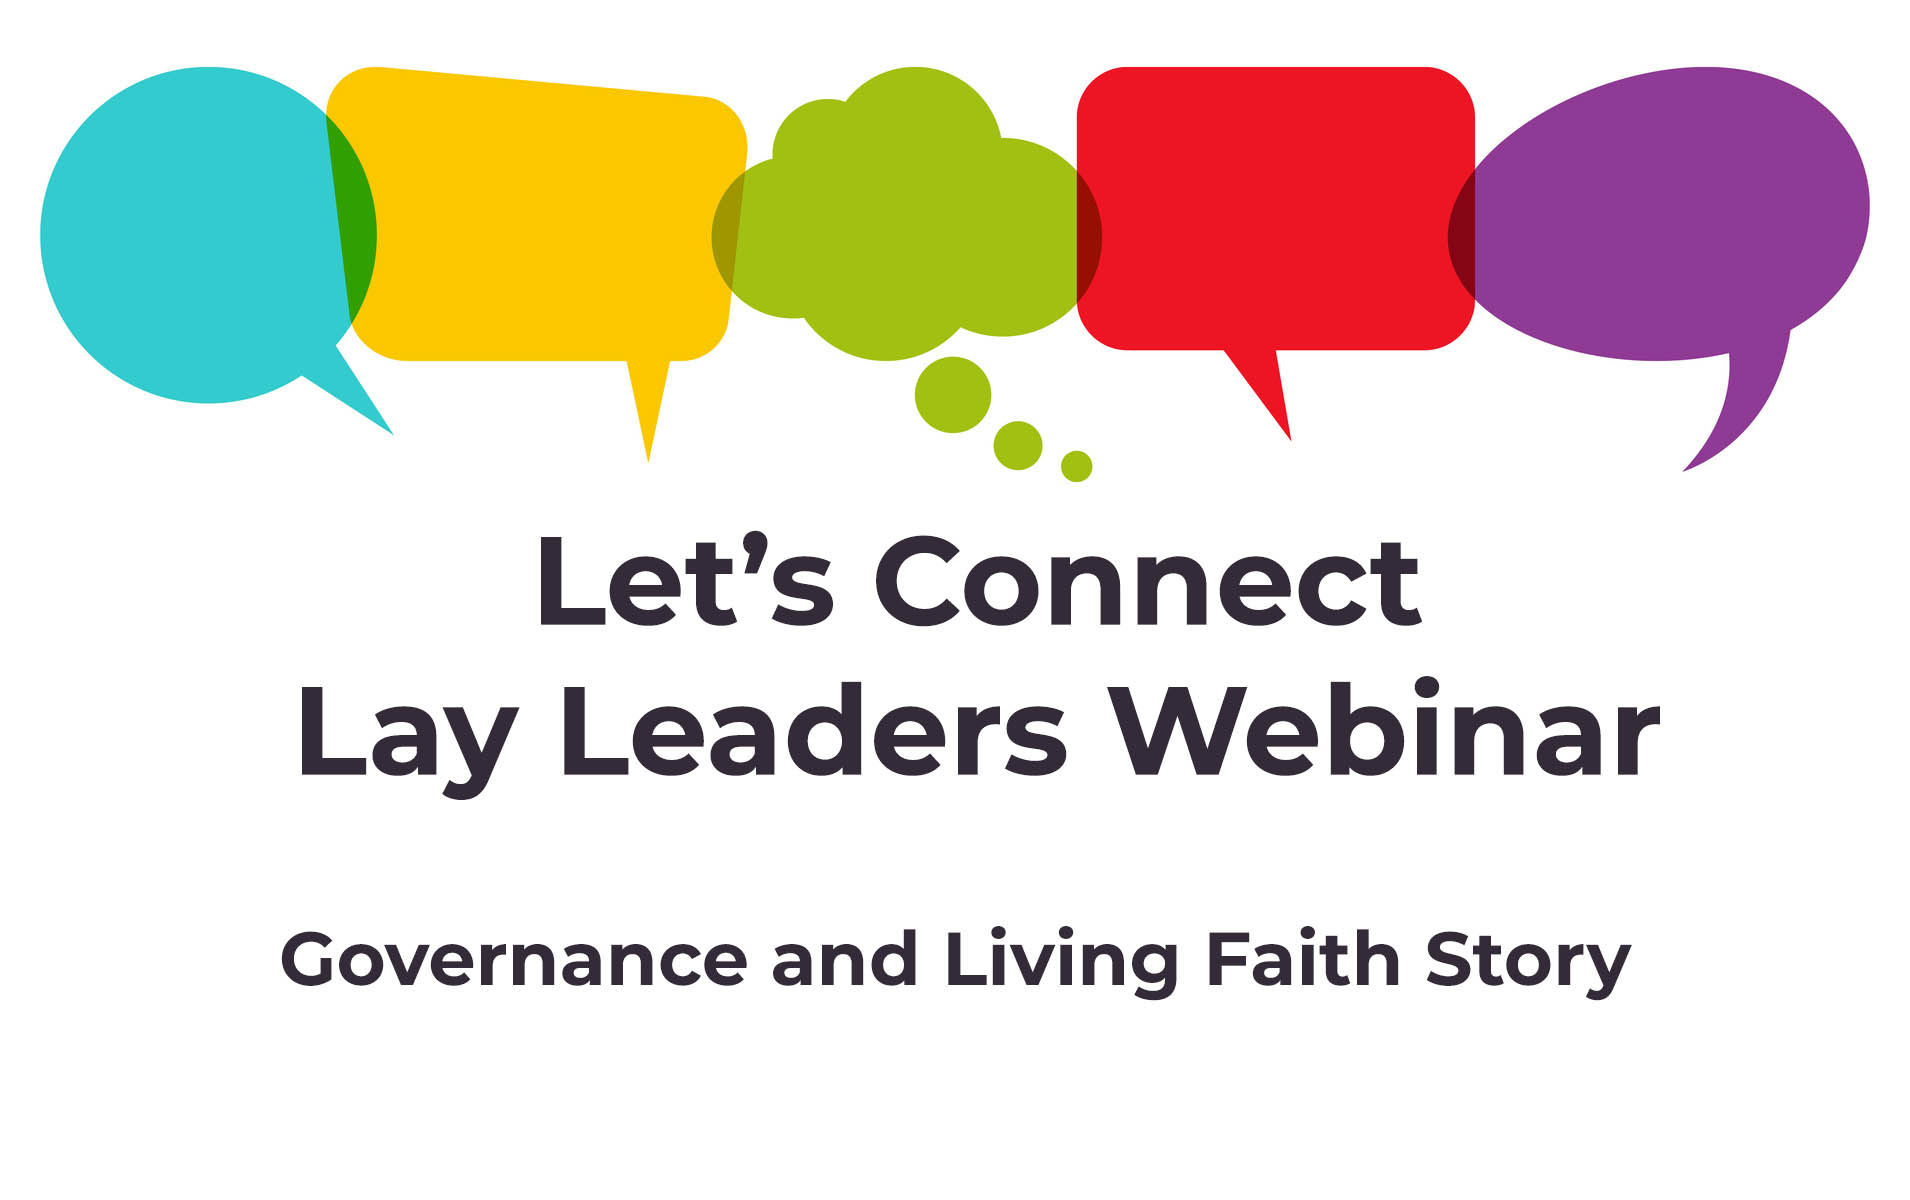 five coloured speech bubbles in a row with the title of the webinar underneath